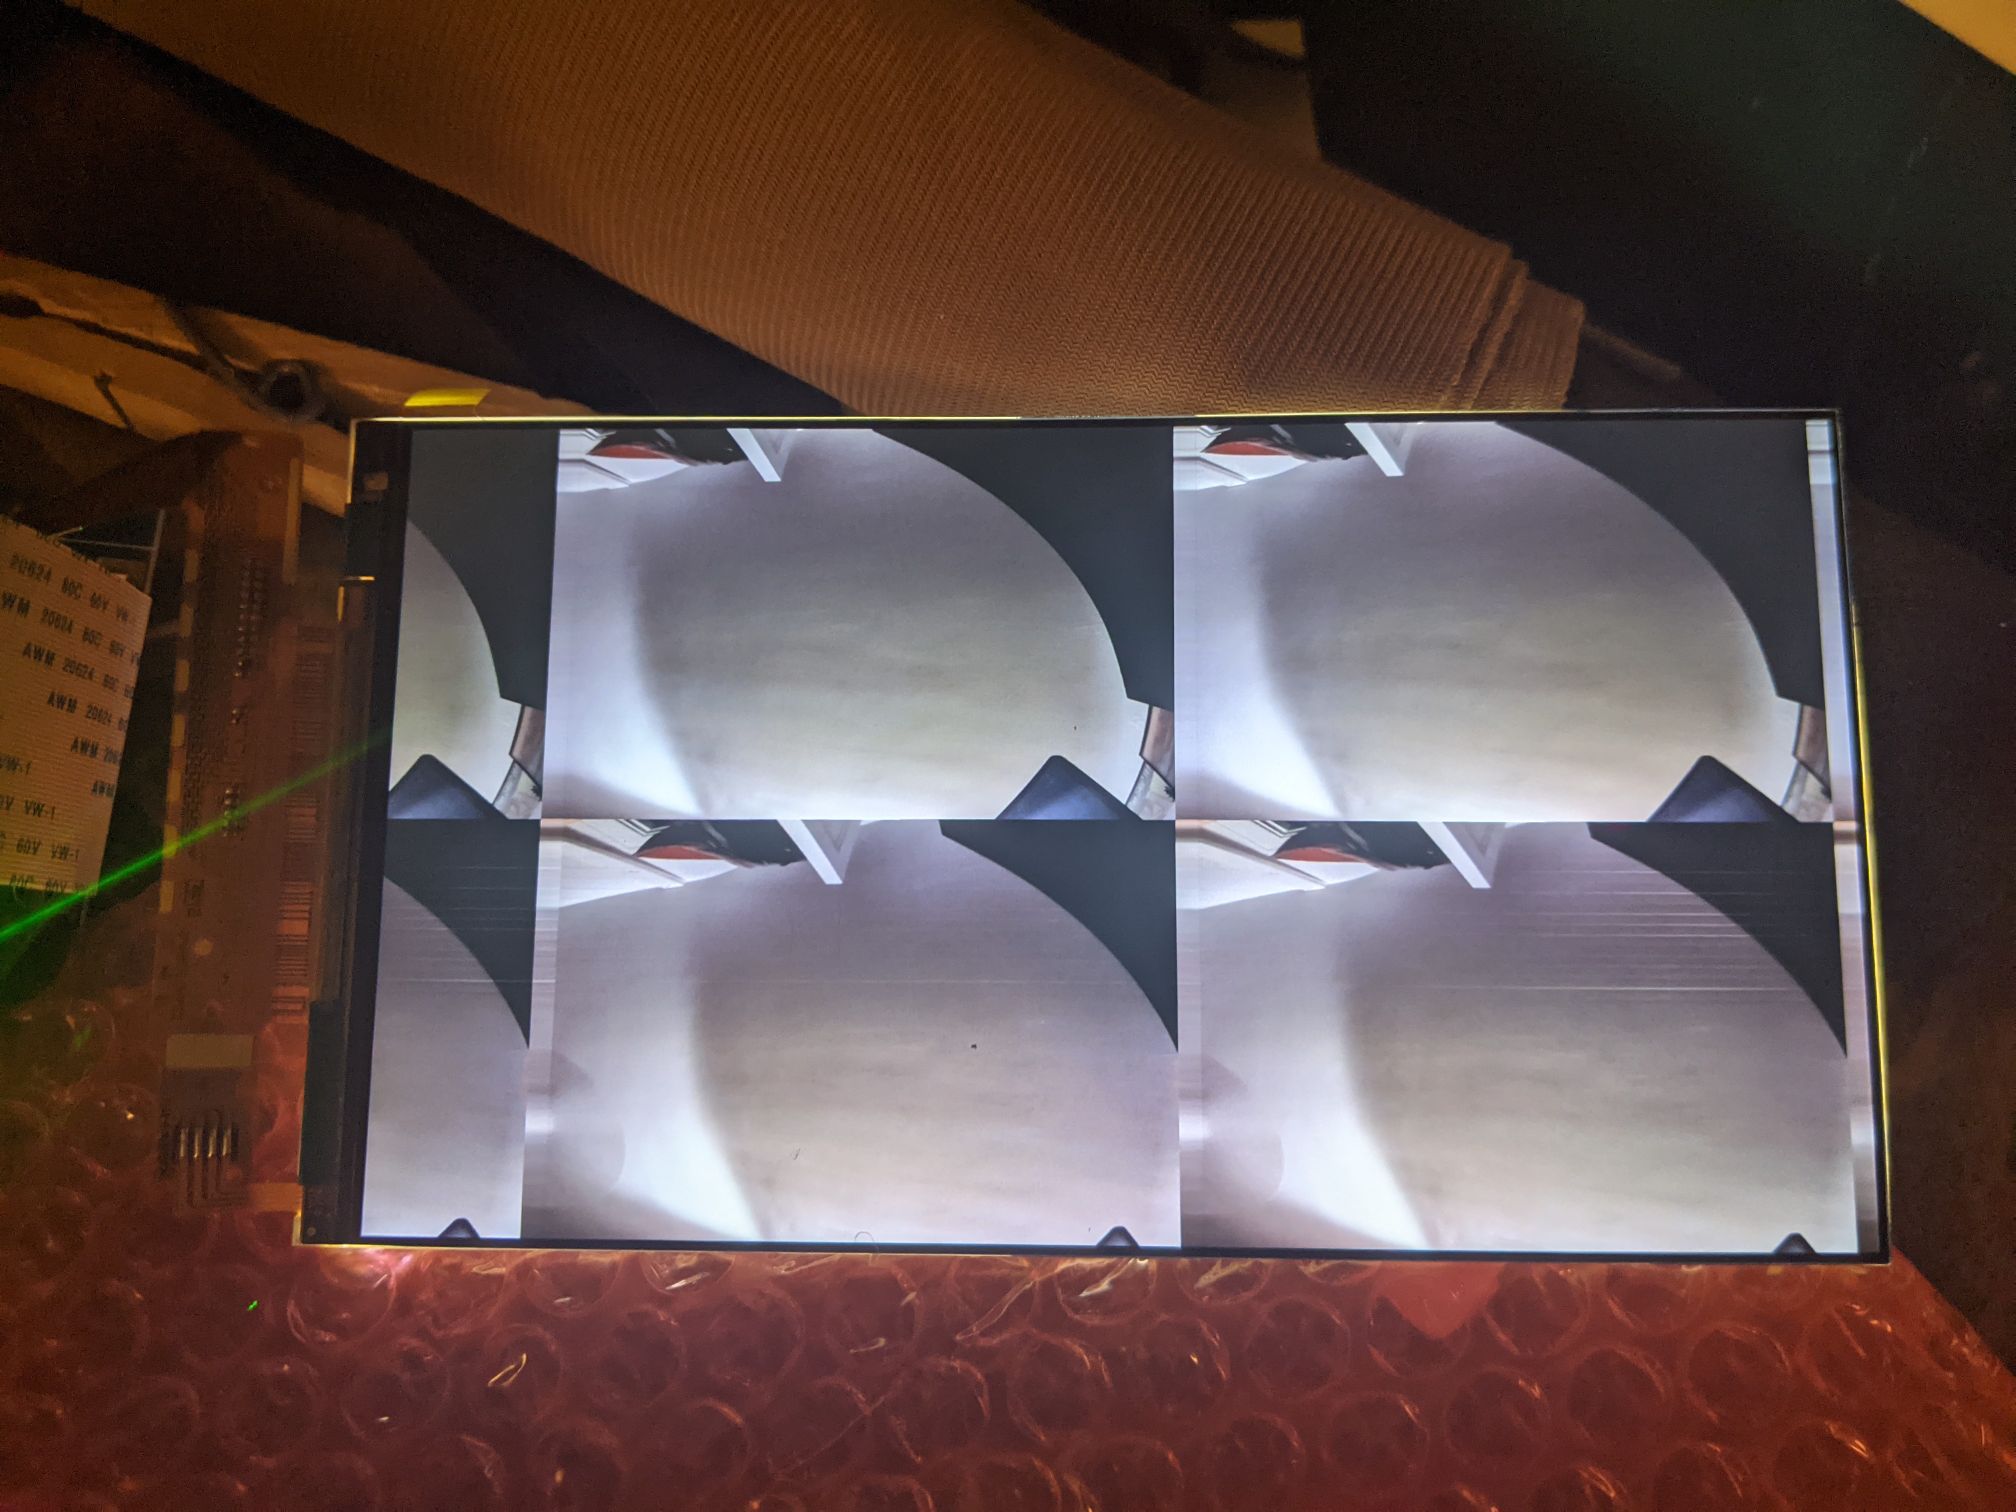 photo of screen showing video stream from pi: A thin sliver of the stream is shown atop two copies of the stream, then another sliver of the stream. The horizontal rectangles of the stream are stacked along the long axis of the screen.